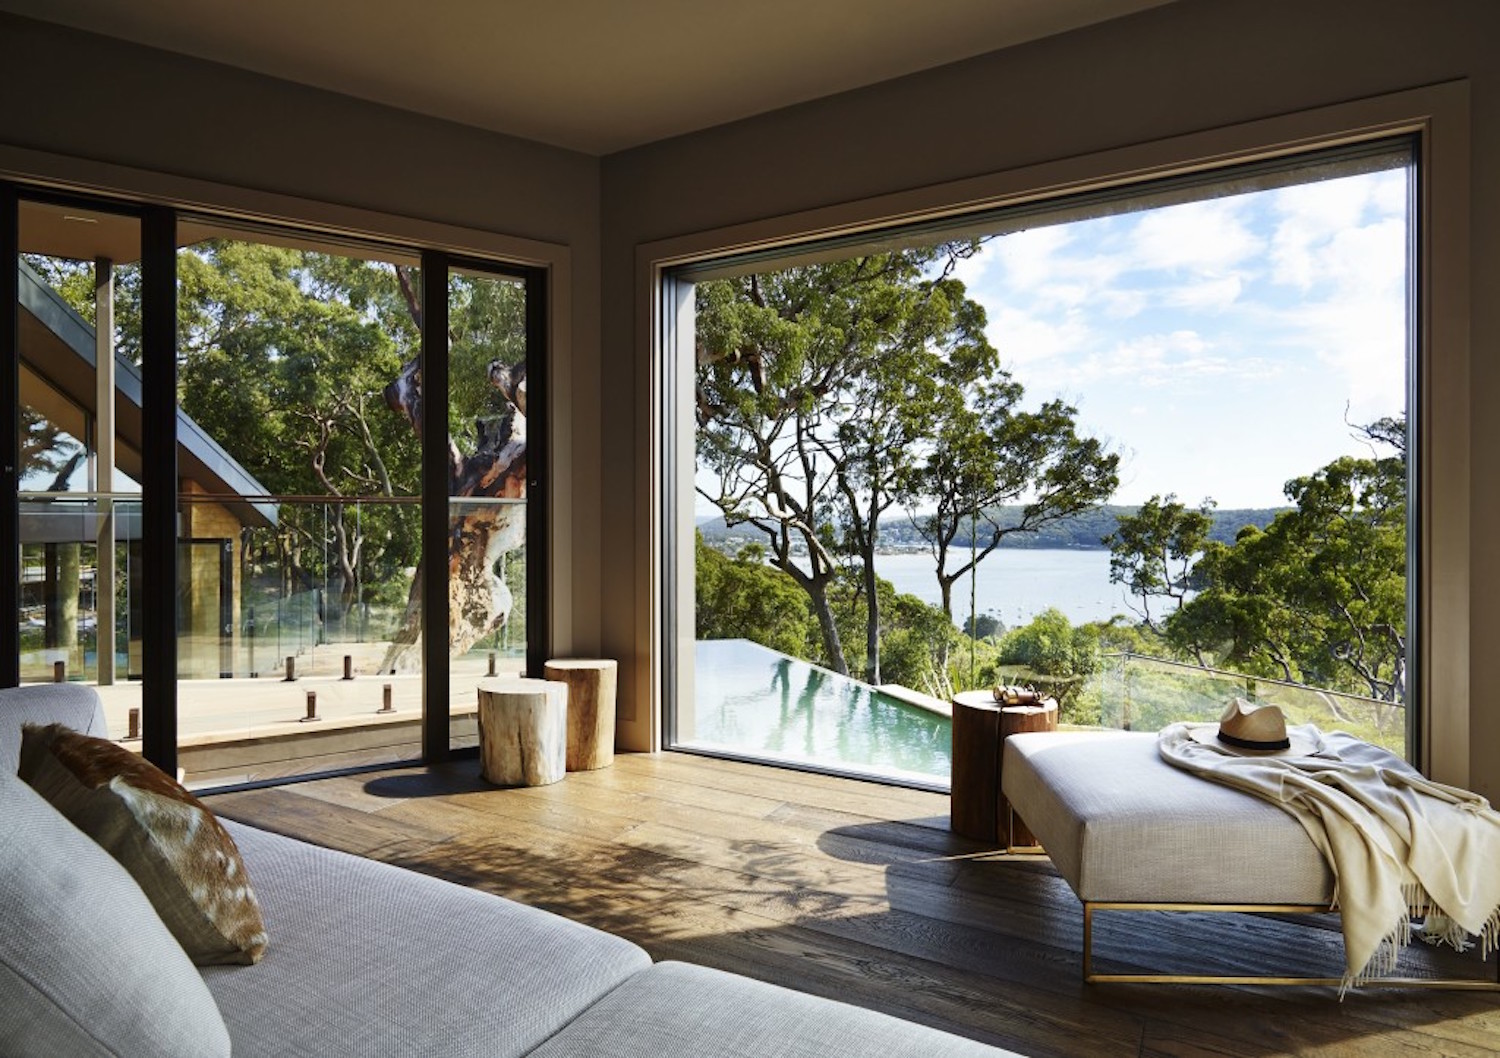 Exclusive Australian accommodation for groups at Pretty Beach House